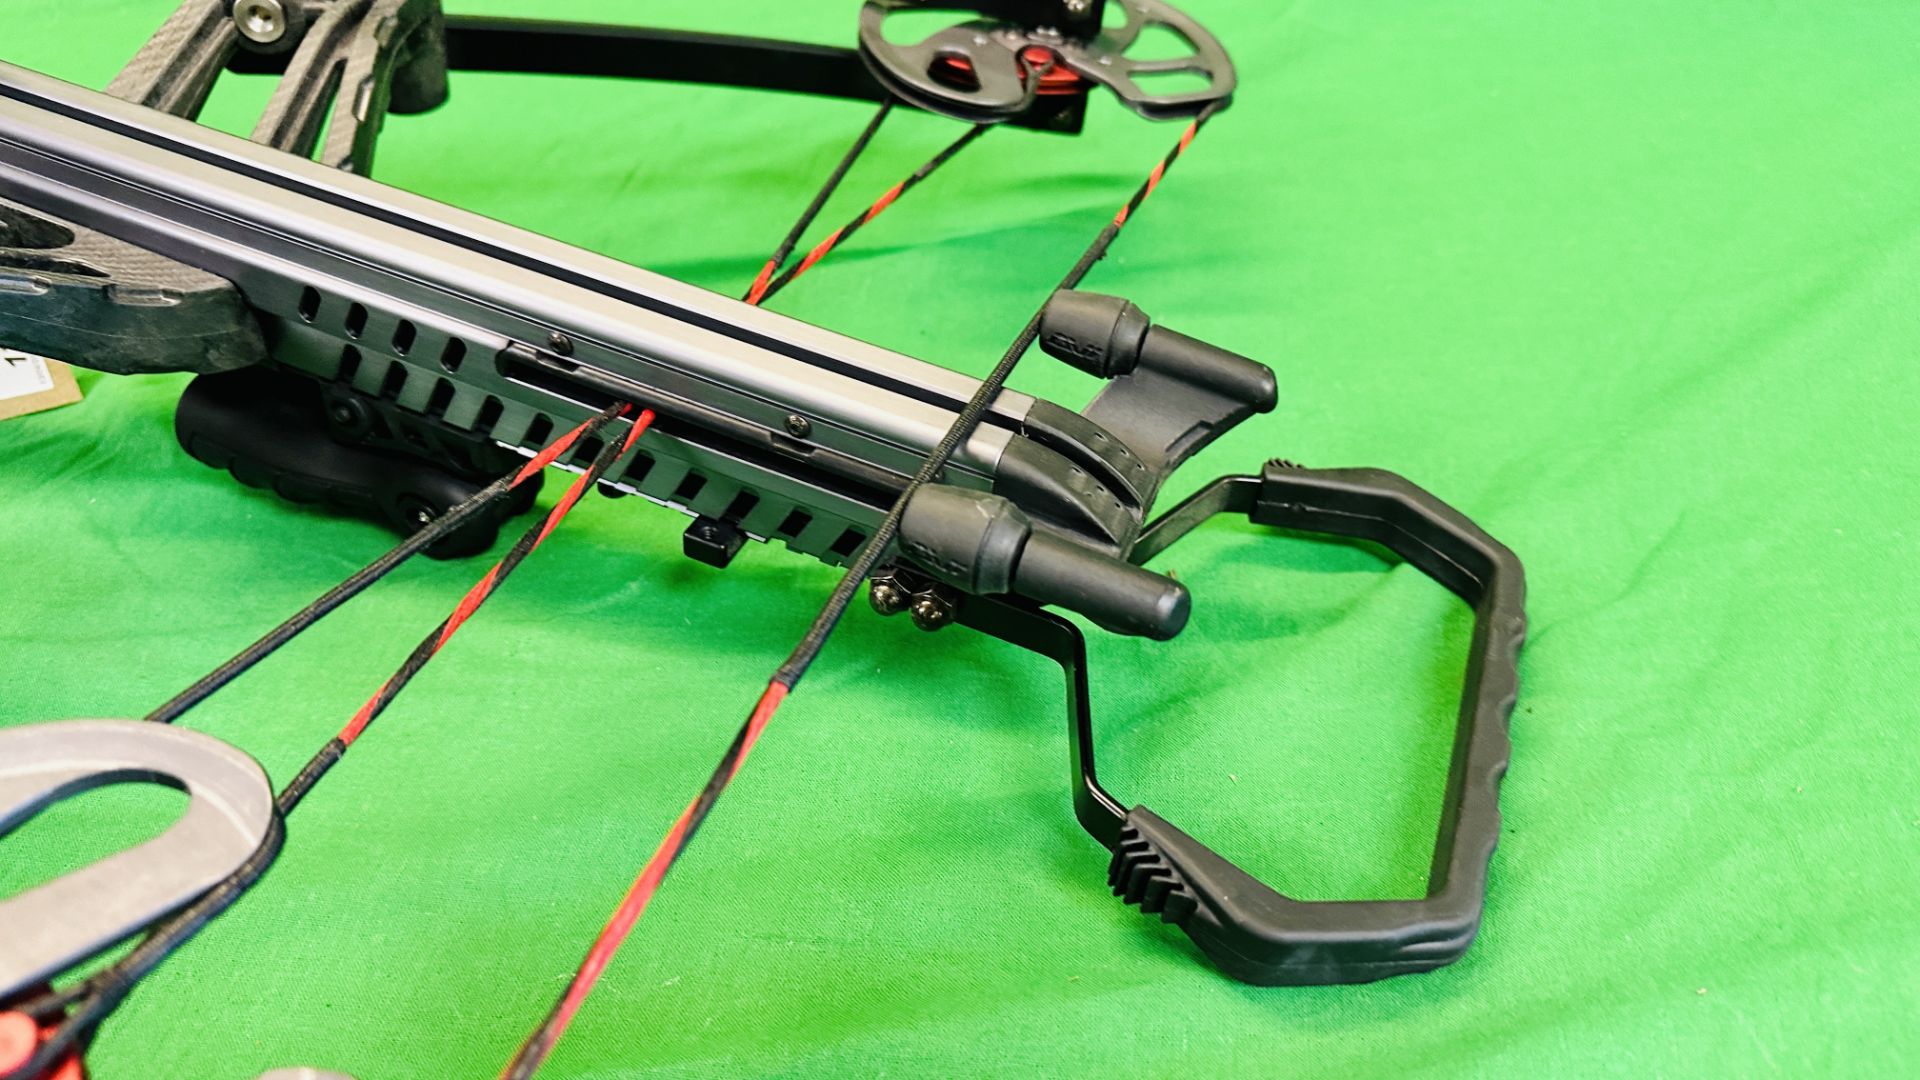 BARNETT "VENGANCE" COMPOUND CROSSBOW COMPLETE WITH THREE CARBON FIBRE CROSSBOW BOLTS, QUIVER, - Image 8 of 35